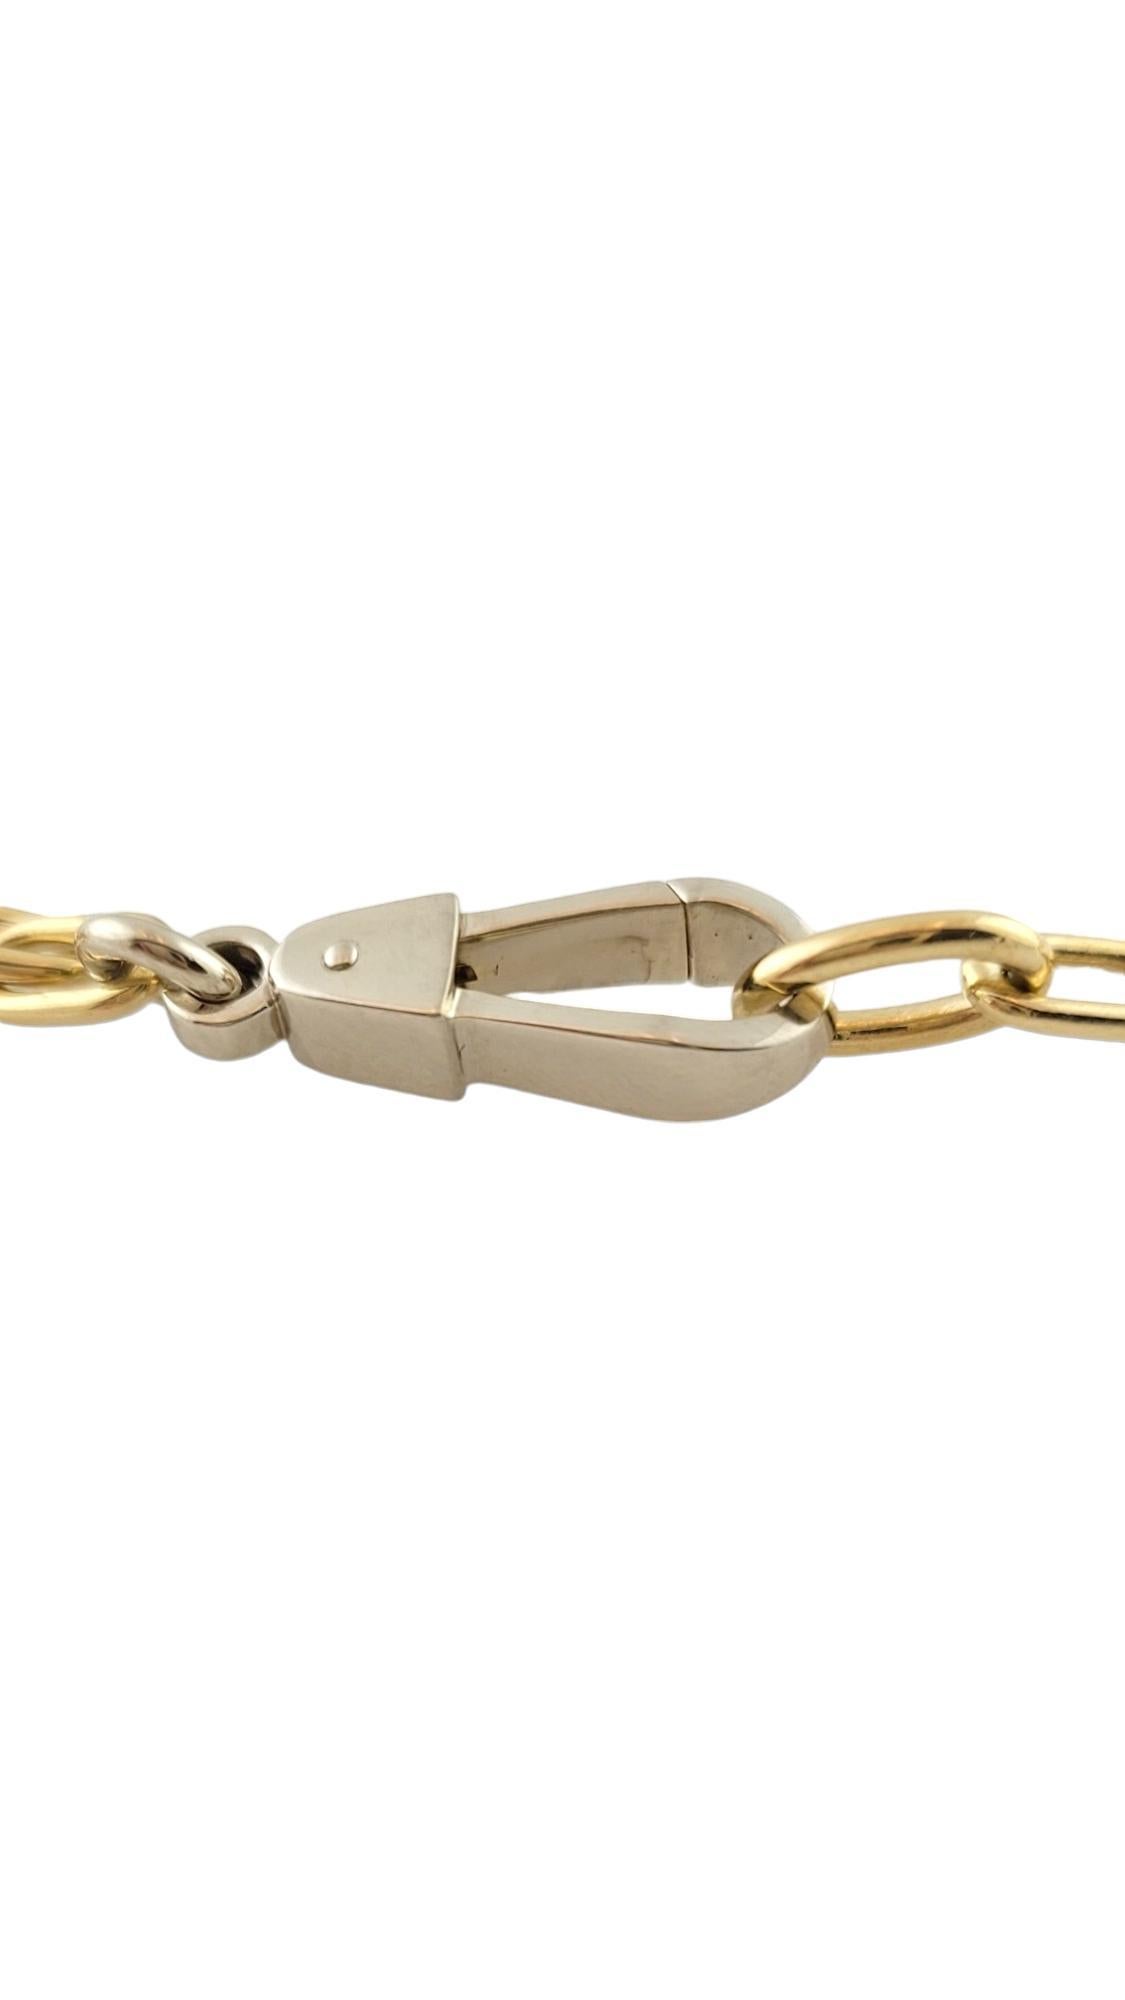 Women's 18K Yellow Gold Pomellato ID Chain Link Necklace #16123 For Sale